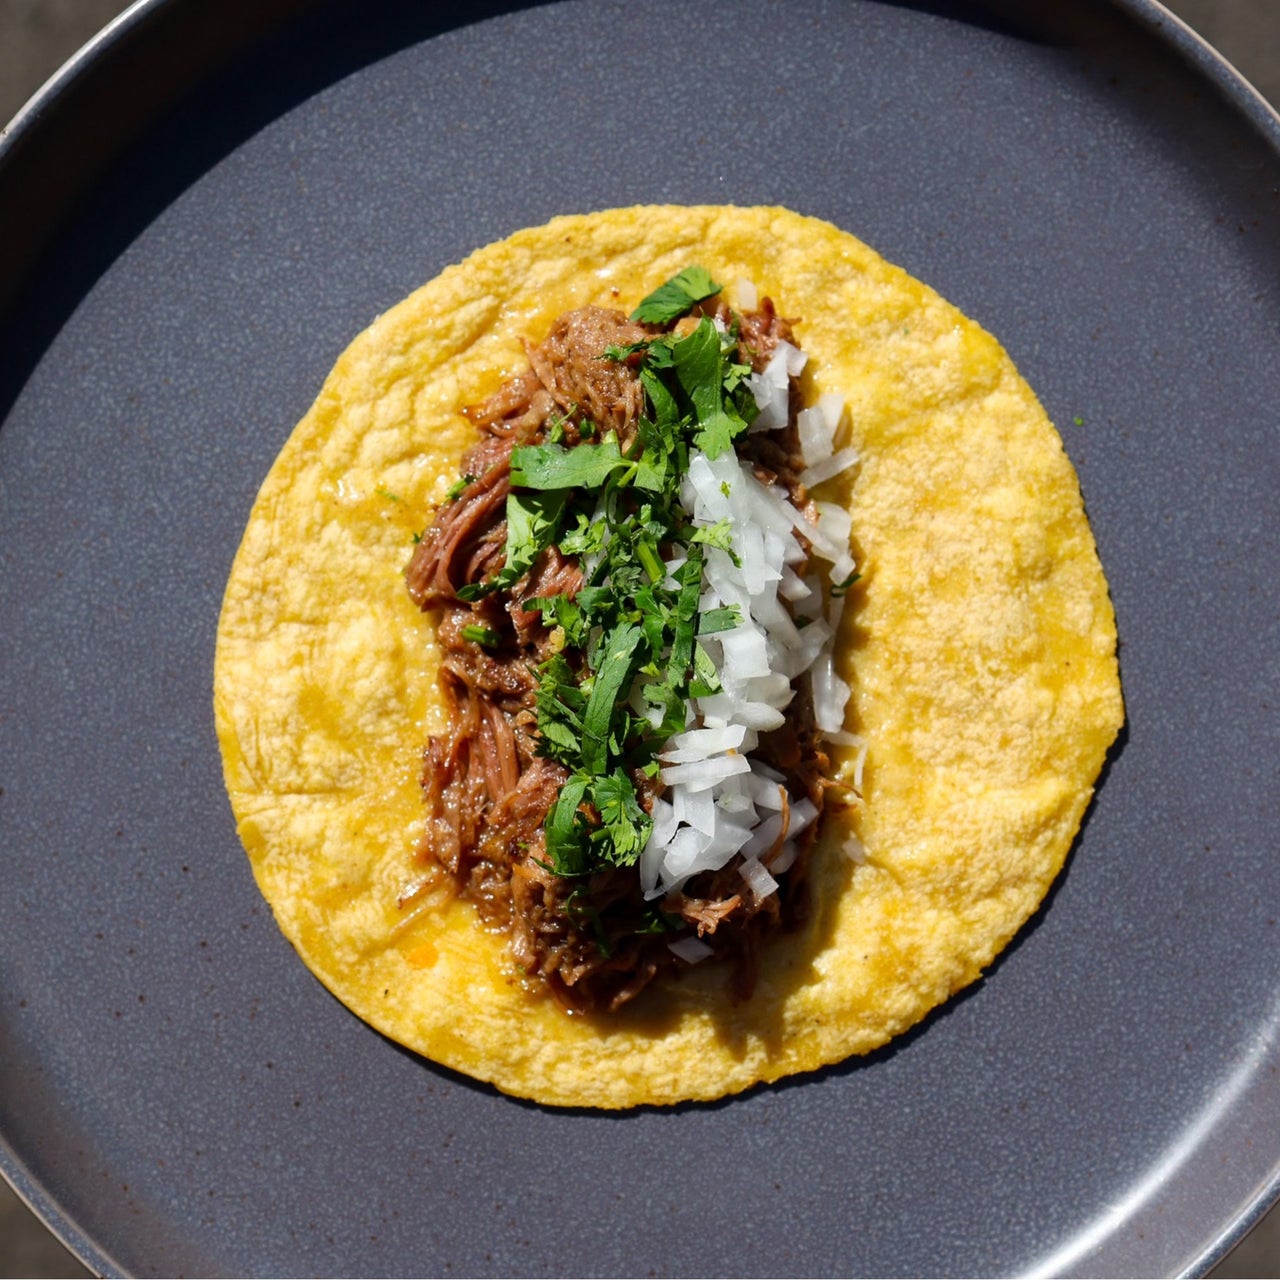 A taco with meat, cilantro, and onions.